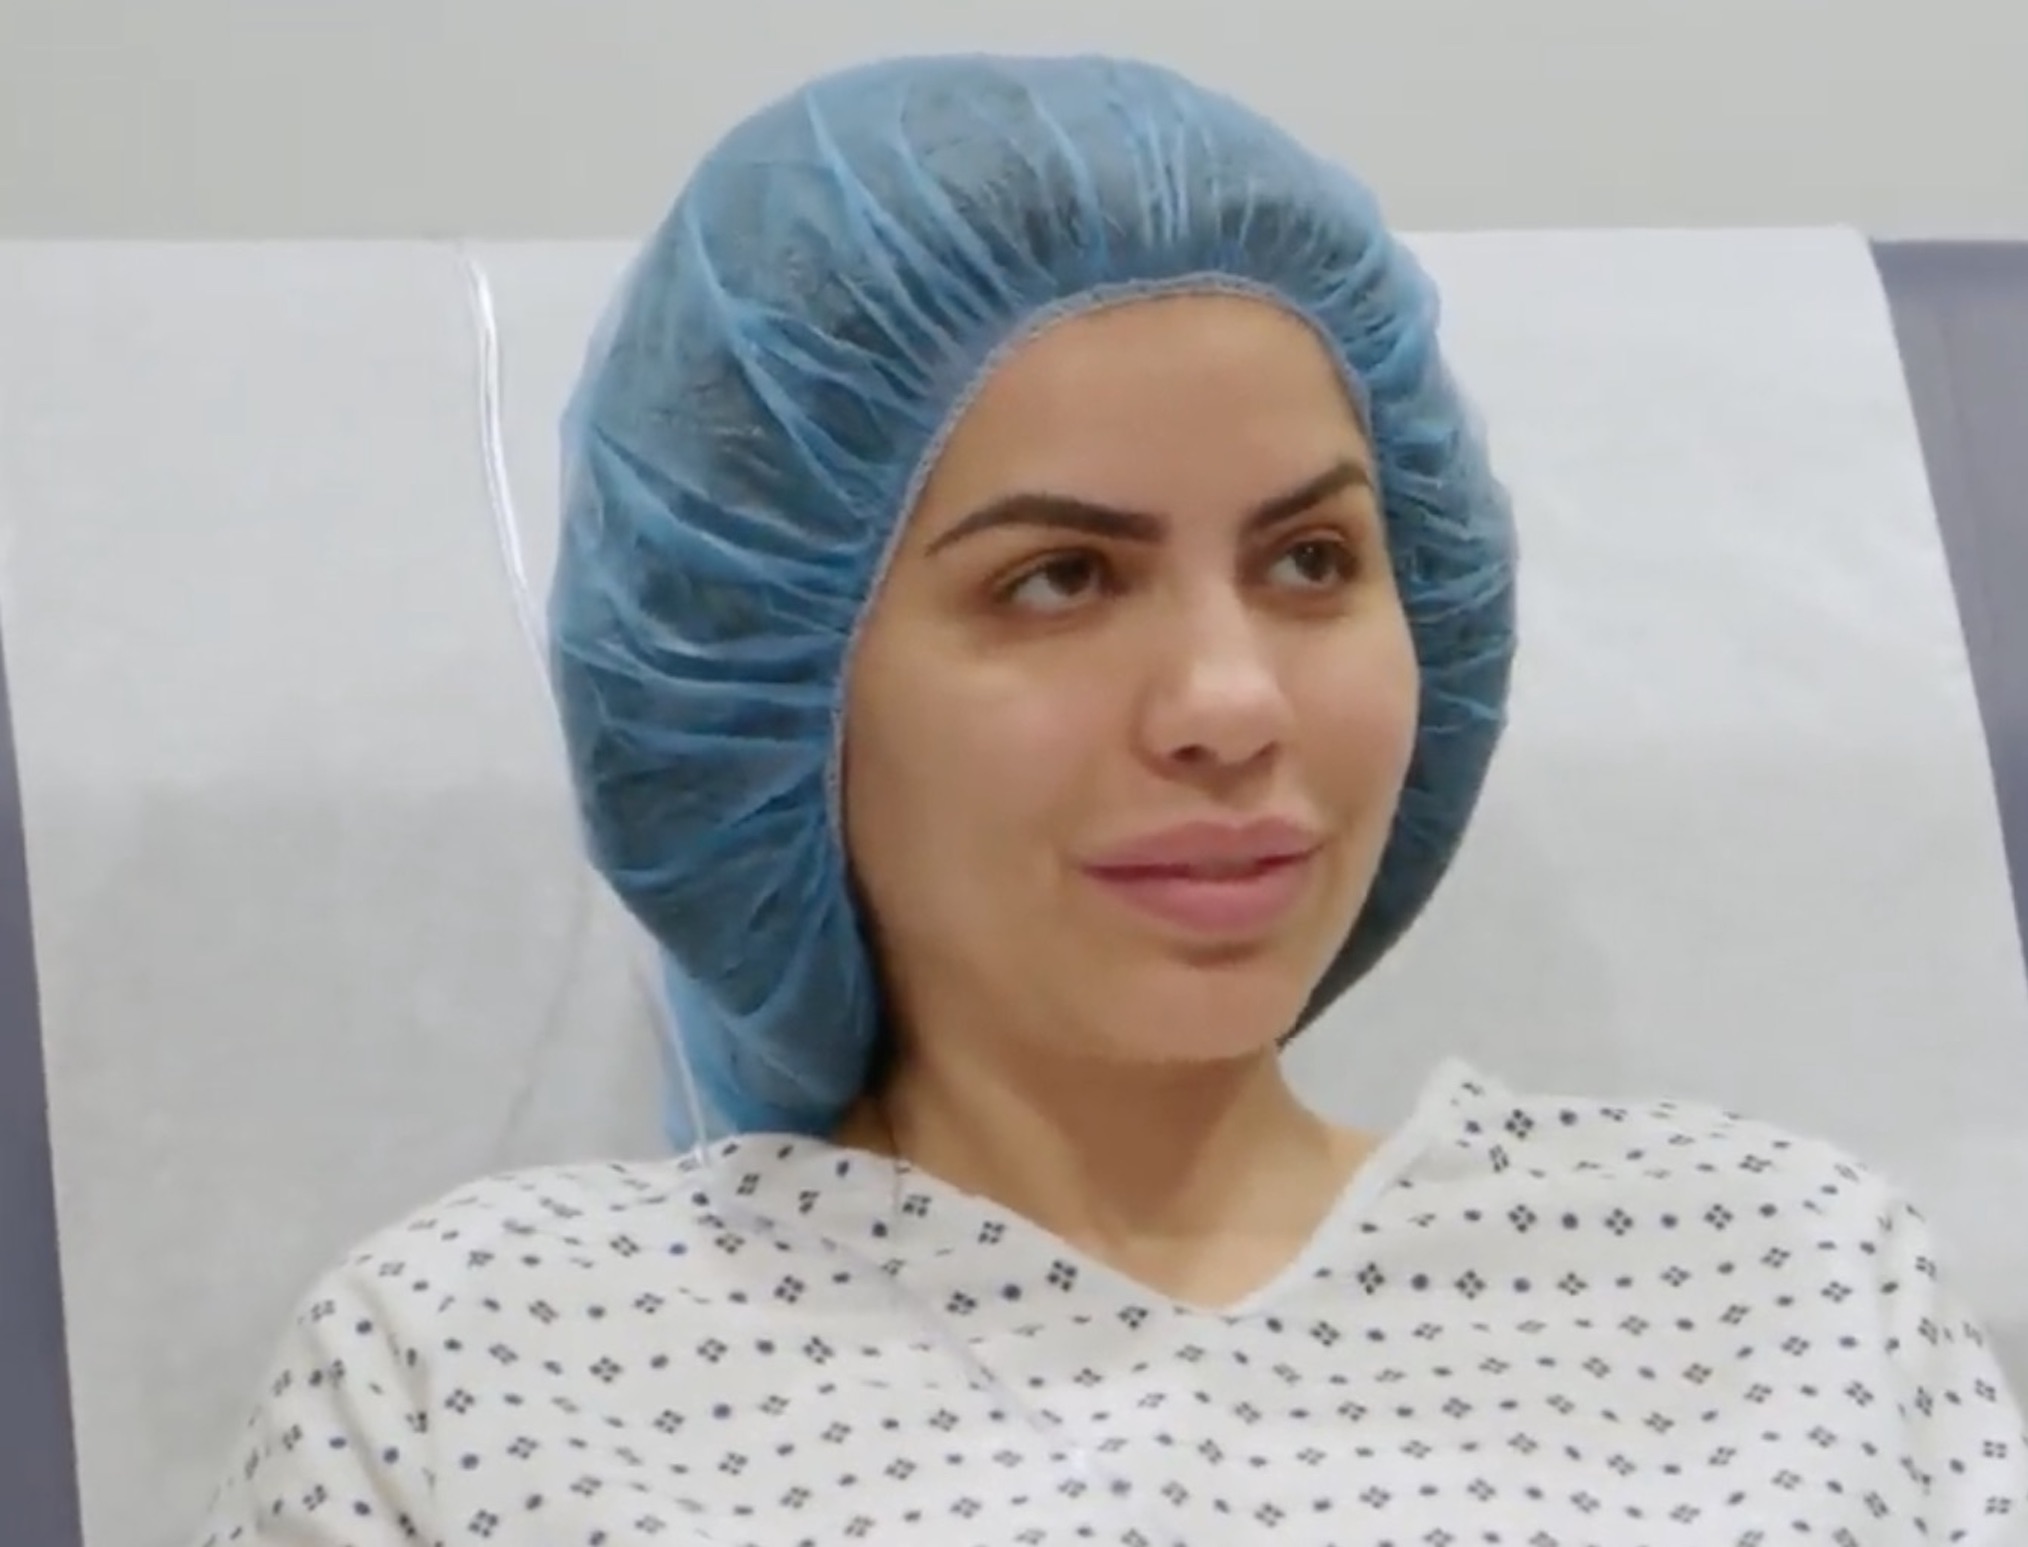 Larissa Doctor Office Plastic Surgery 90 Day Fiance Happily Ever After